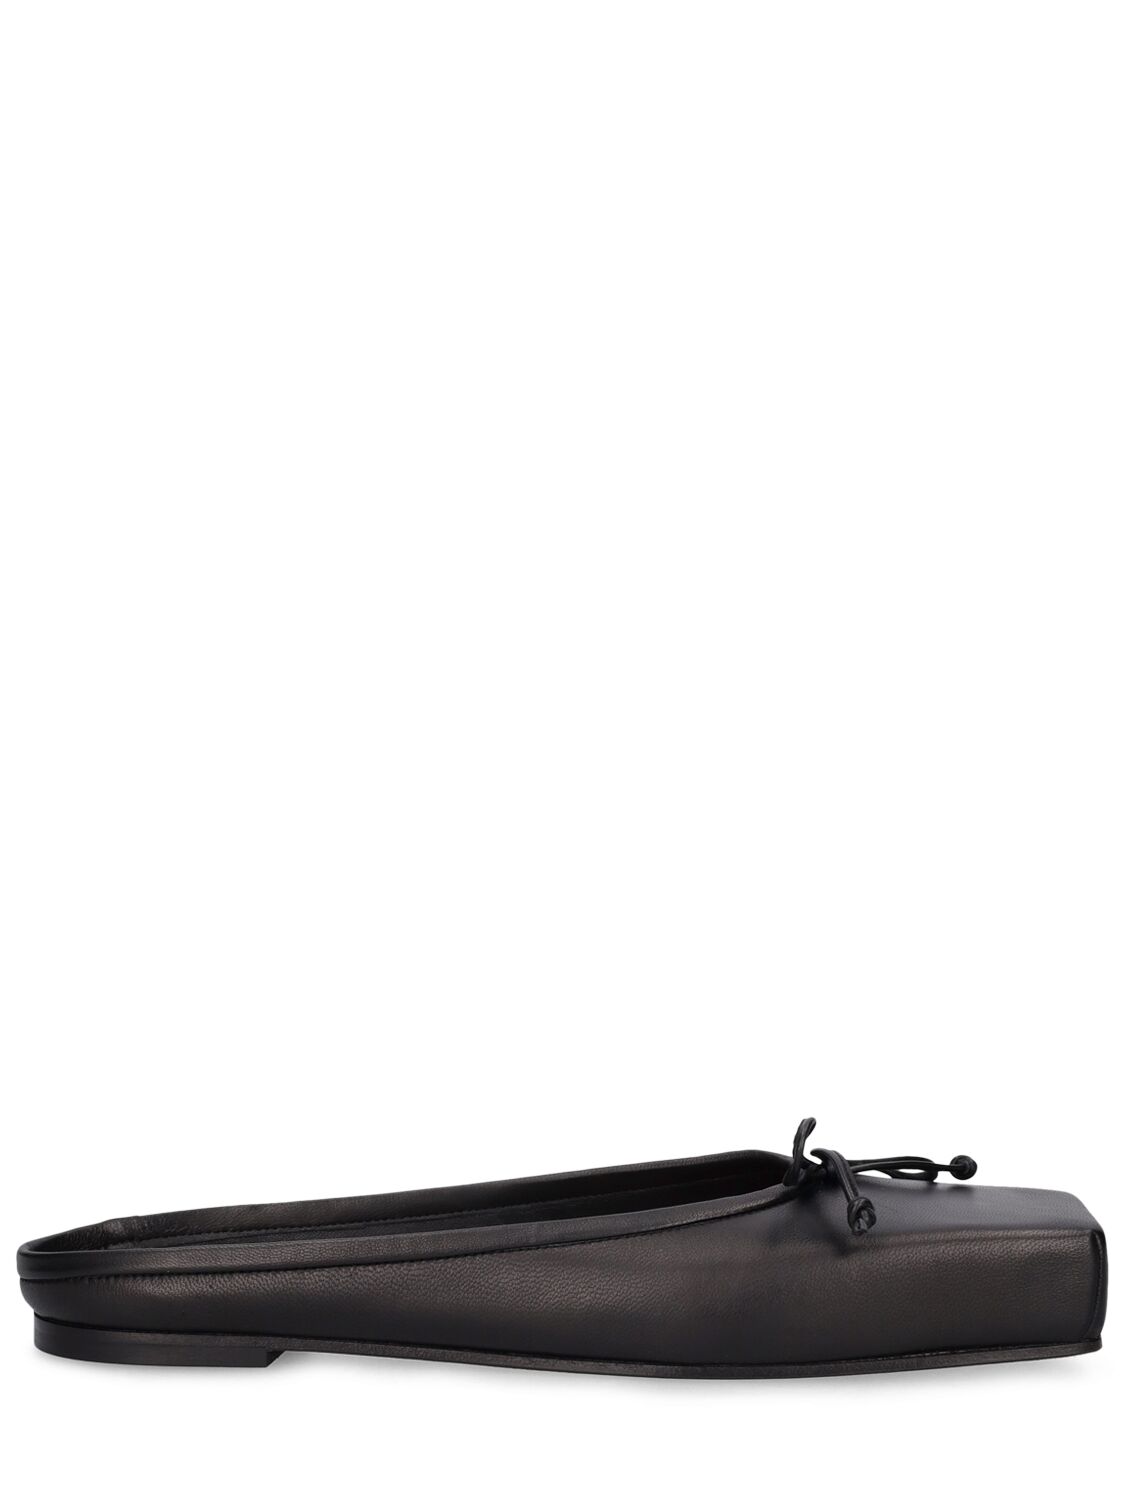 JACQUEMUS 5mm Flat Leather Mules